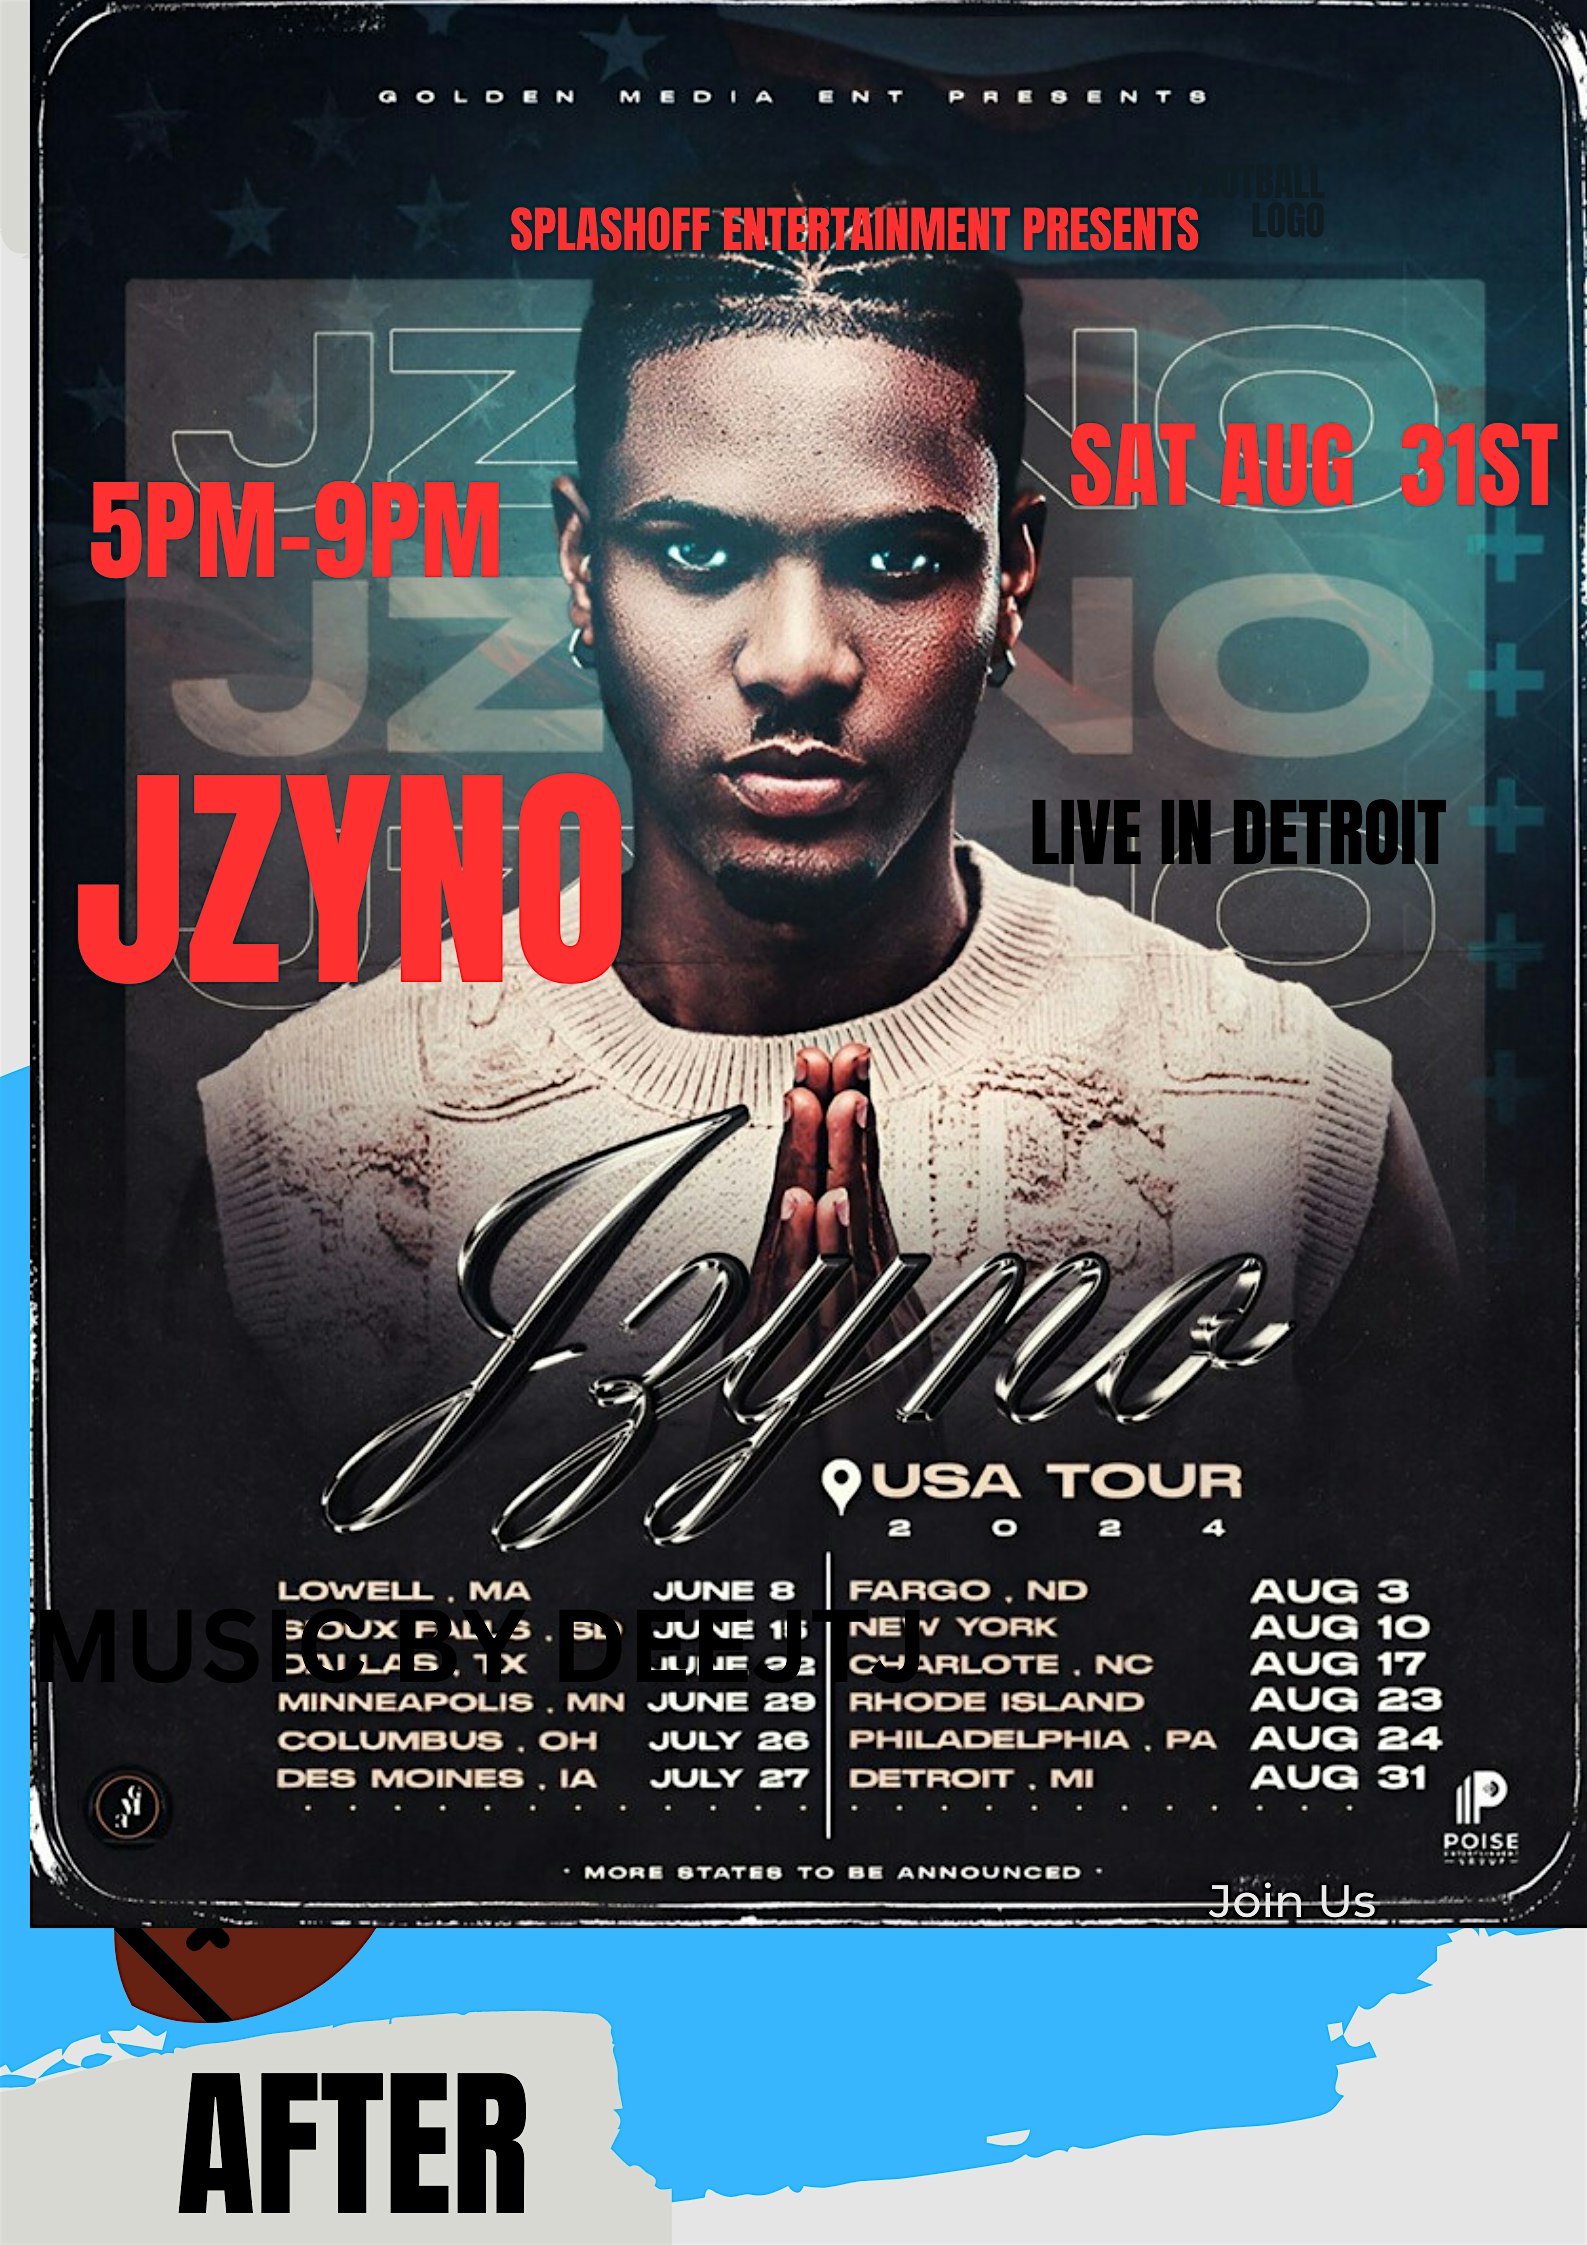 JZYNO PERFORMING LIVE IN DETROIT  (AFROBEAT ARTIST)